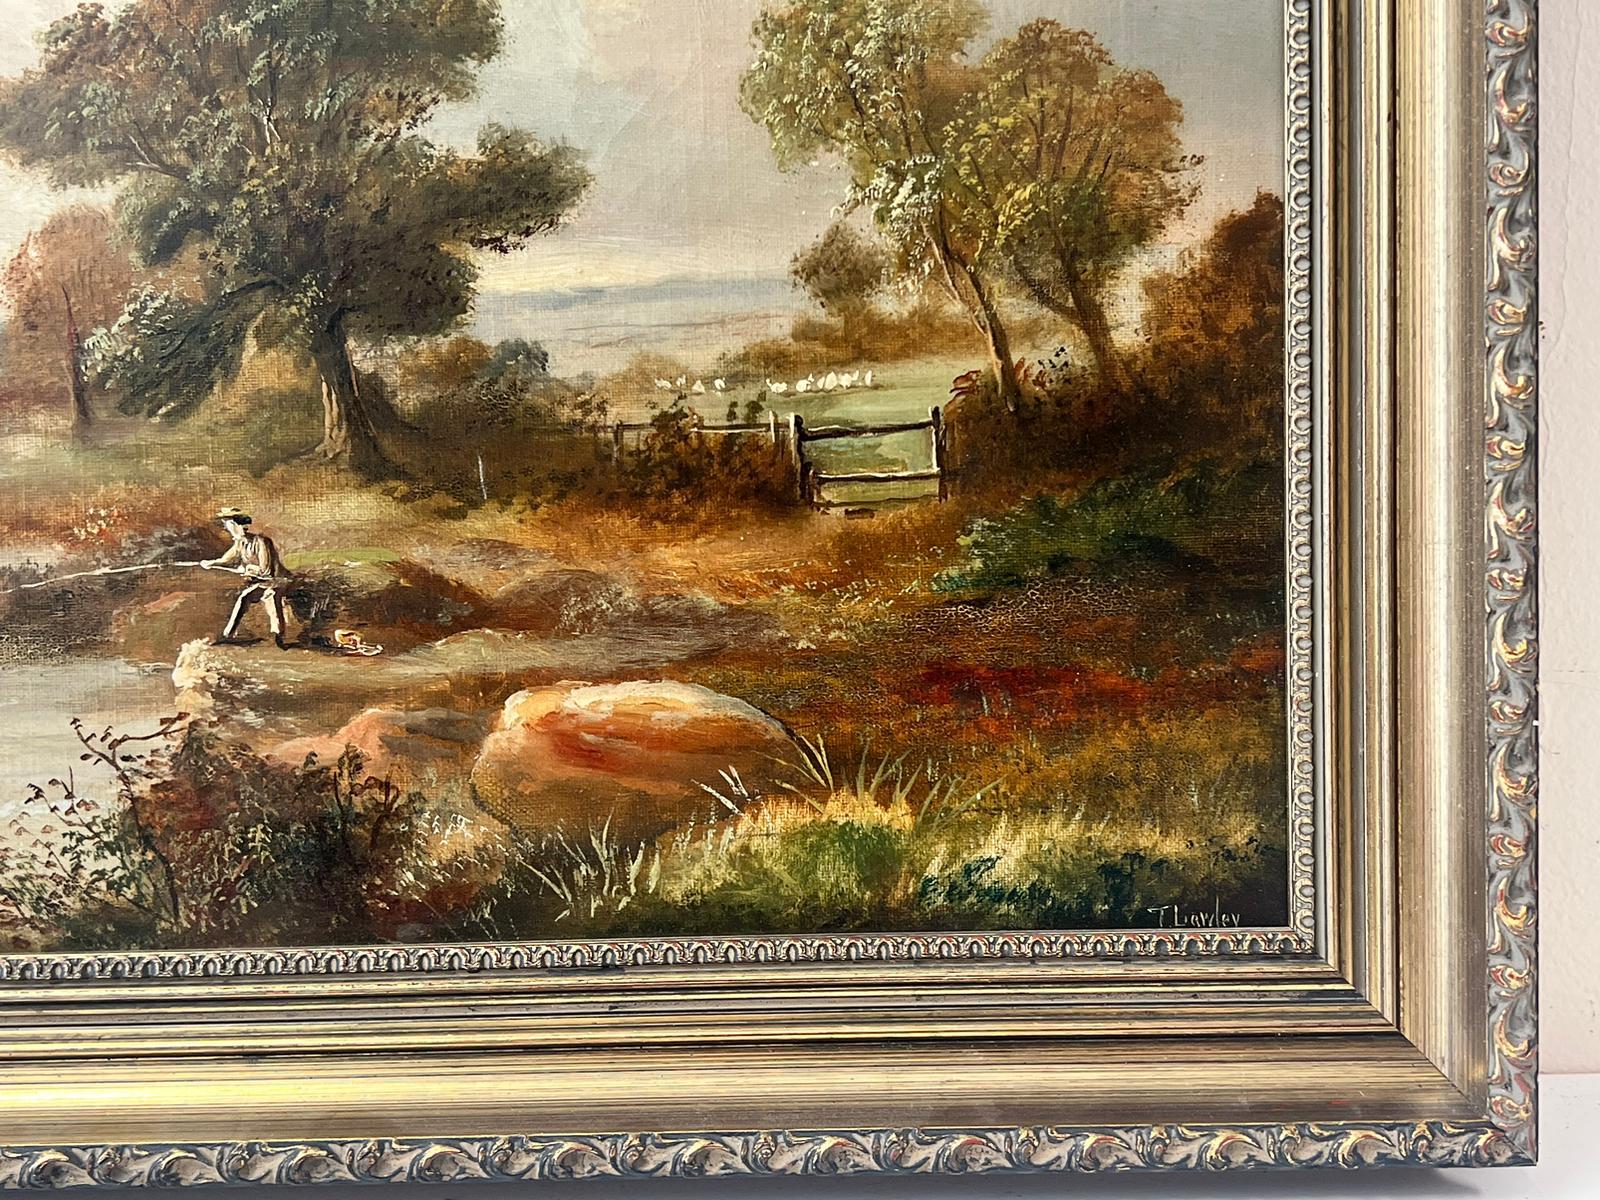 T. Lawley (British late 19th century)
signed oil on canvas, framed
framed: 15 x 23.5 inches 
canvas: 12 x 20 inches
provenance: private collection, England
condition: very good and sound condition  